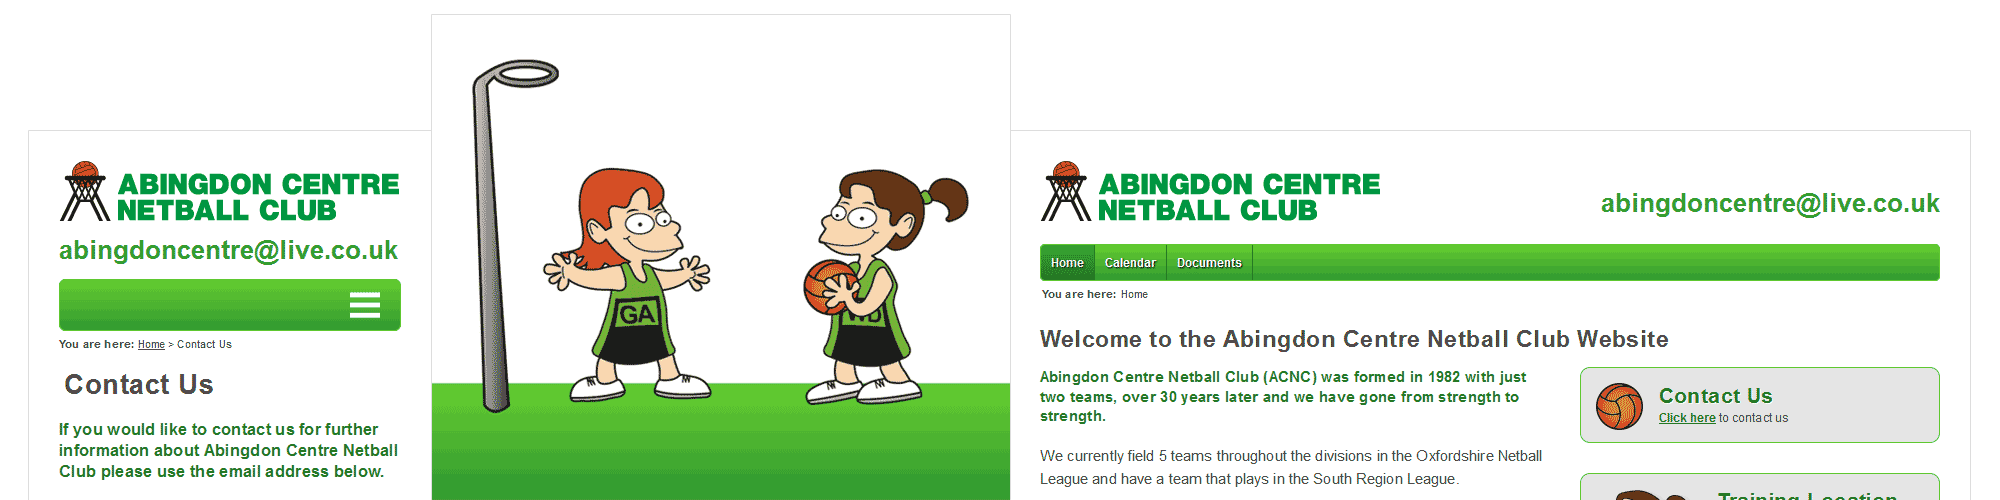 Screenshot of the Abingdon Centre Netball Club case study by Michael Saunders